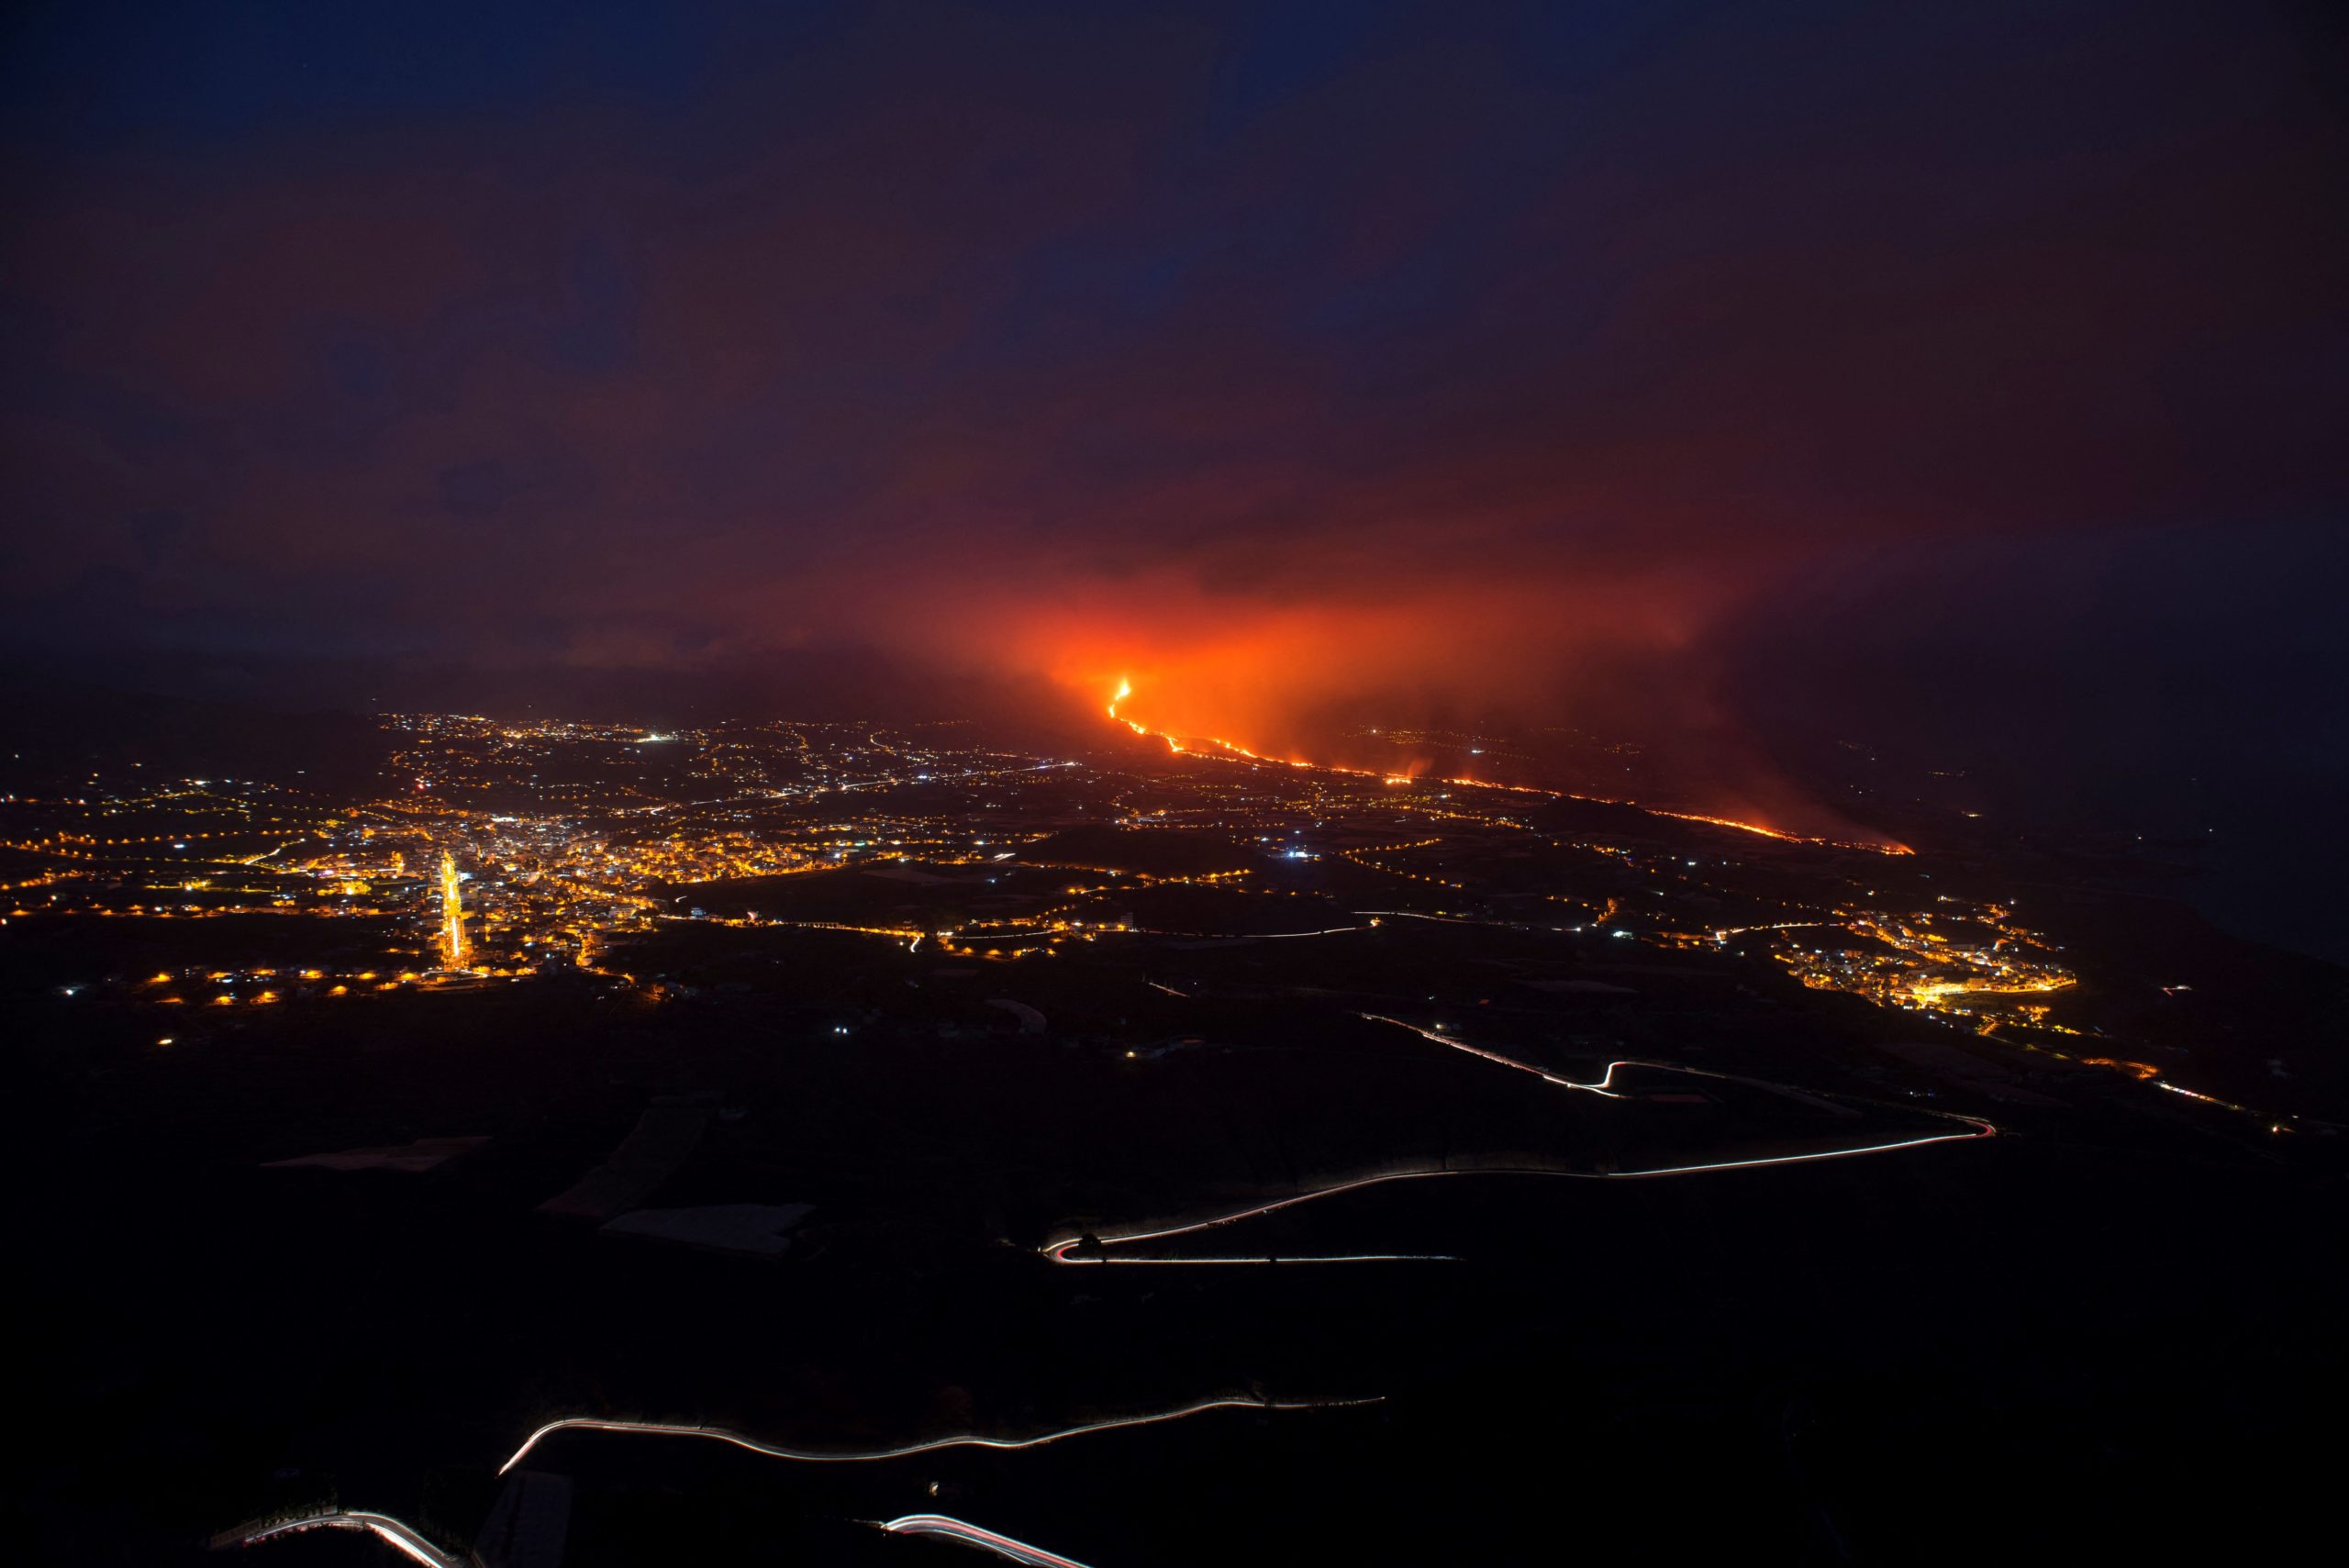  The Cumbre Vieja volcano, pictured from Tijarafe, spews lava, ash, and smoke, on the Canary Island of La Palma, at night on October 10, 2021. (Photo: Jorge Guerrero/AFP, Getty Images)